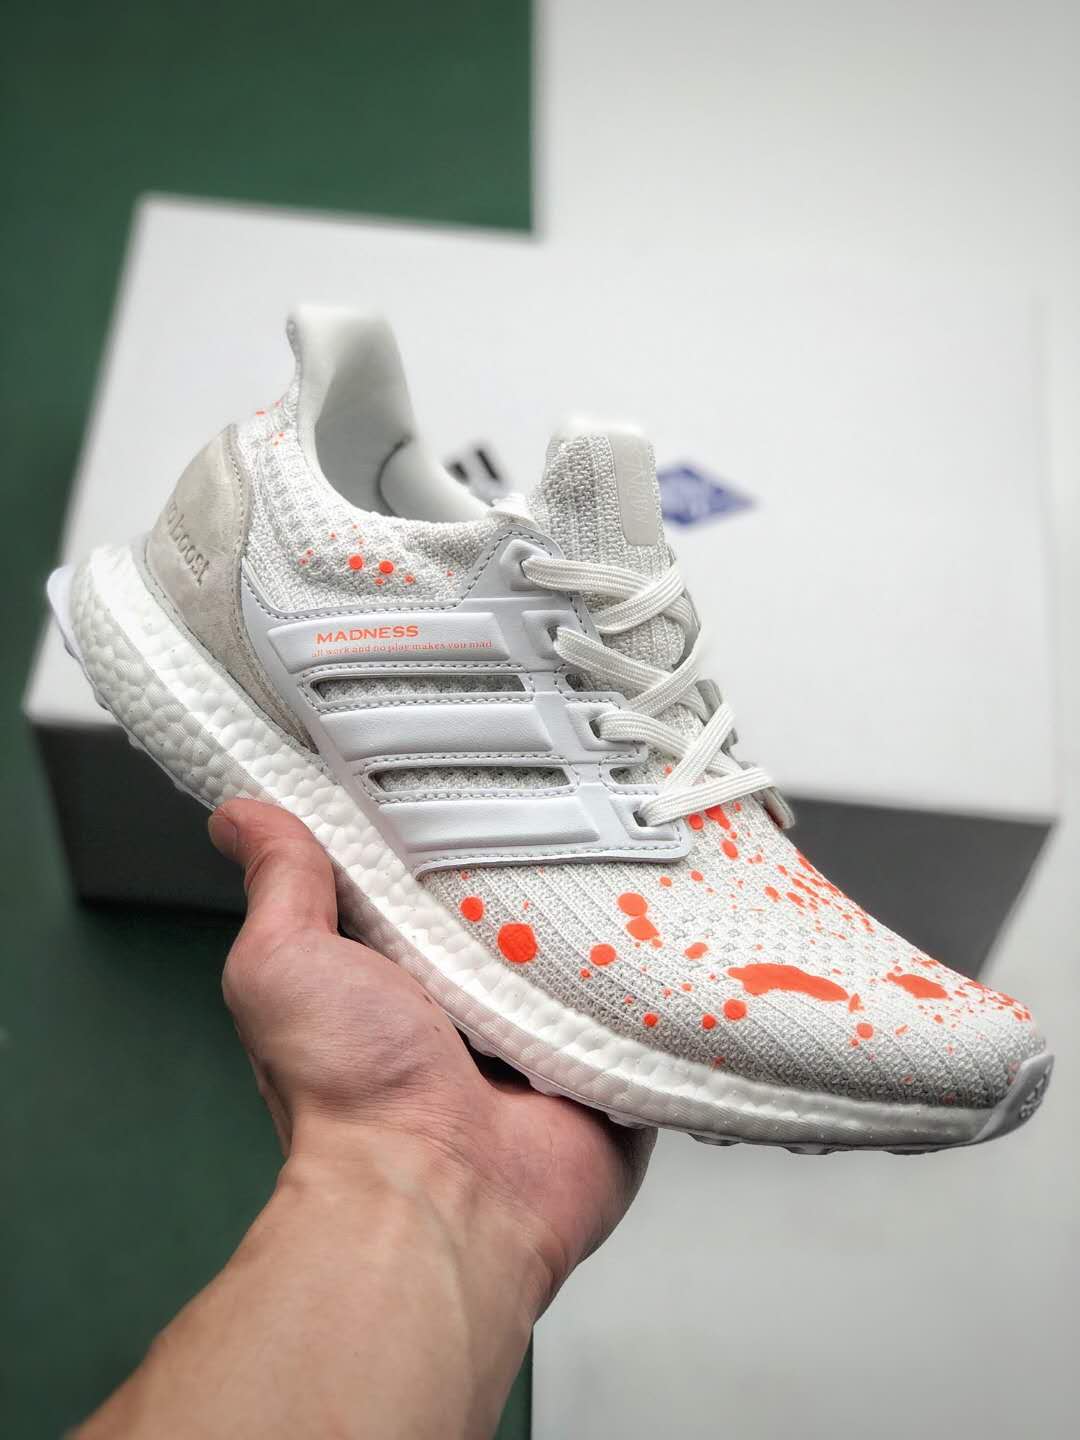 Adidas Madness x UltraBoost 4.0 White EF0143 - Limited Edition Release!